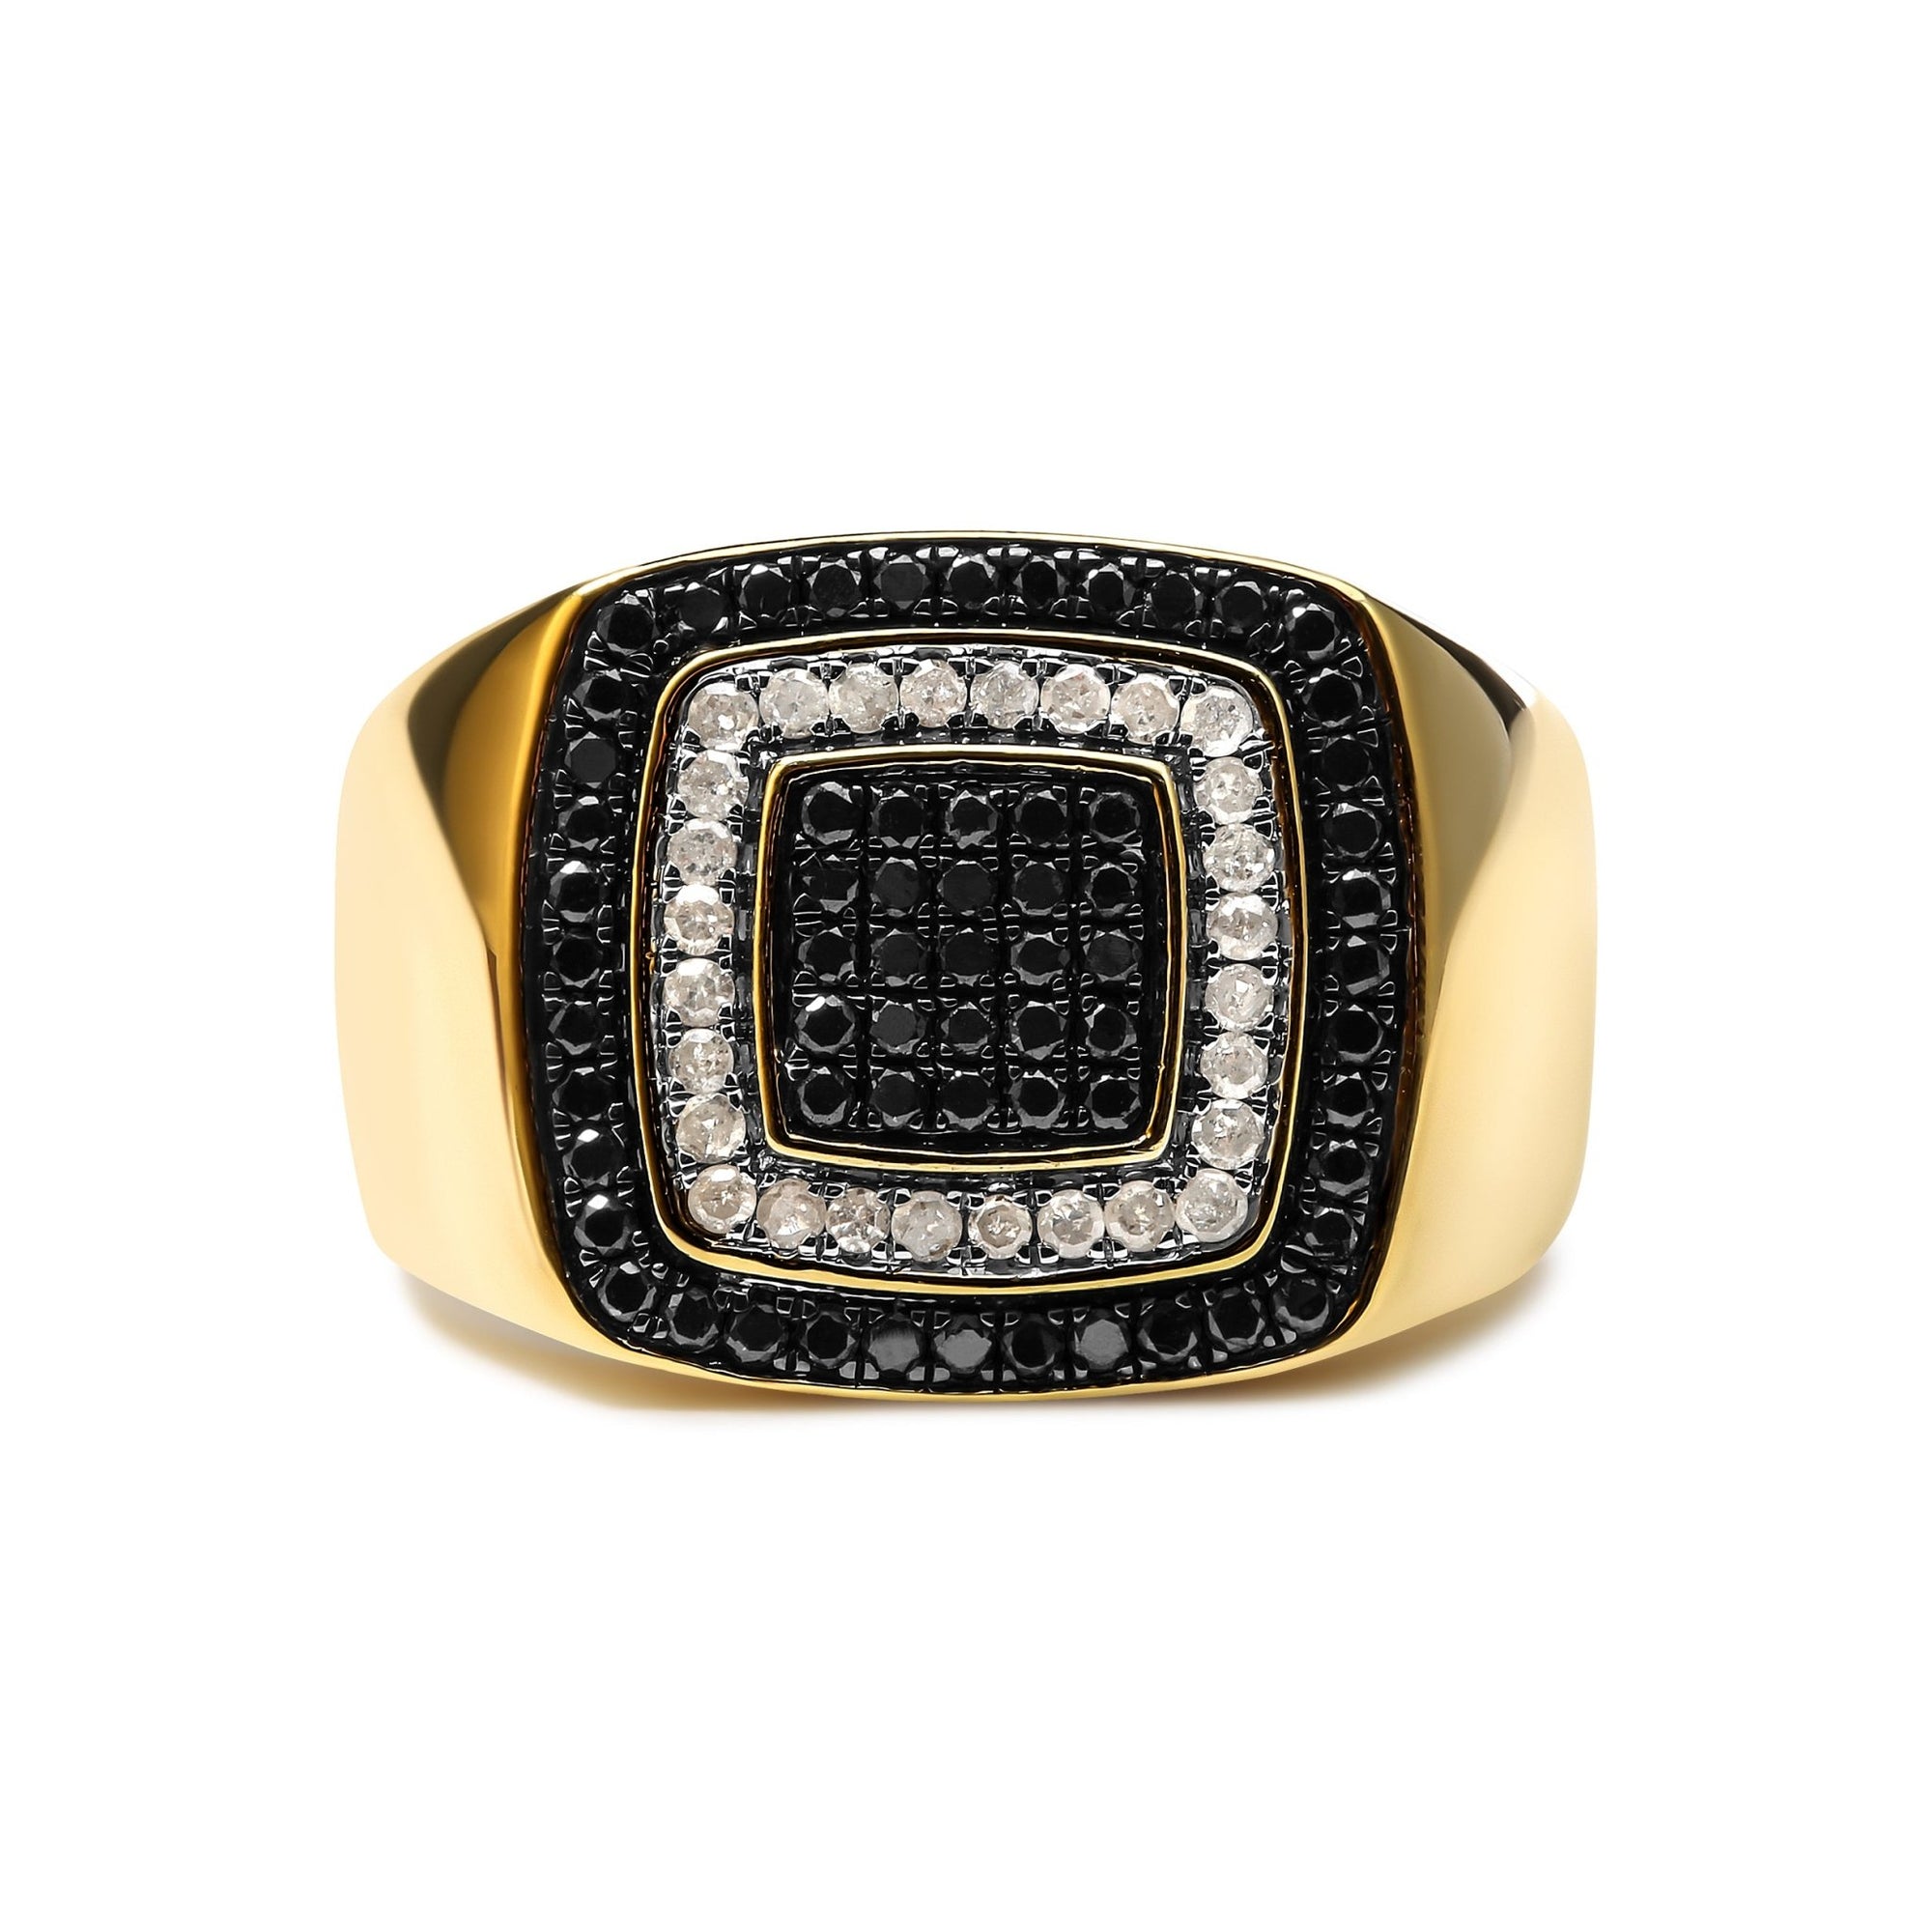 Men's 10K Yellow Gold 3/4 Cttw White and Black Treated Diamond Ring Band (Black / I-J Color, I2-I3 Clarity) - Size 10 - LinkagejewelrydesignLinkagejewelrydesign